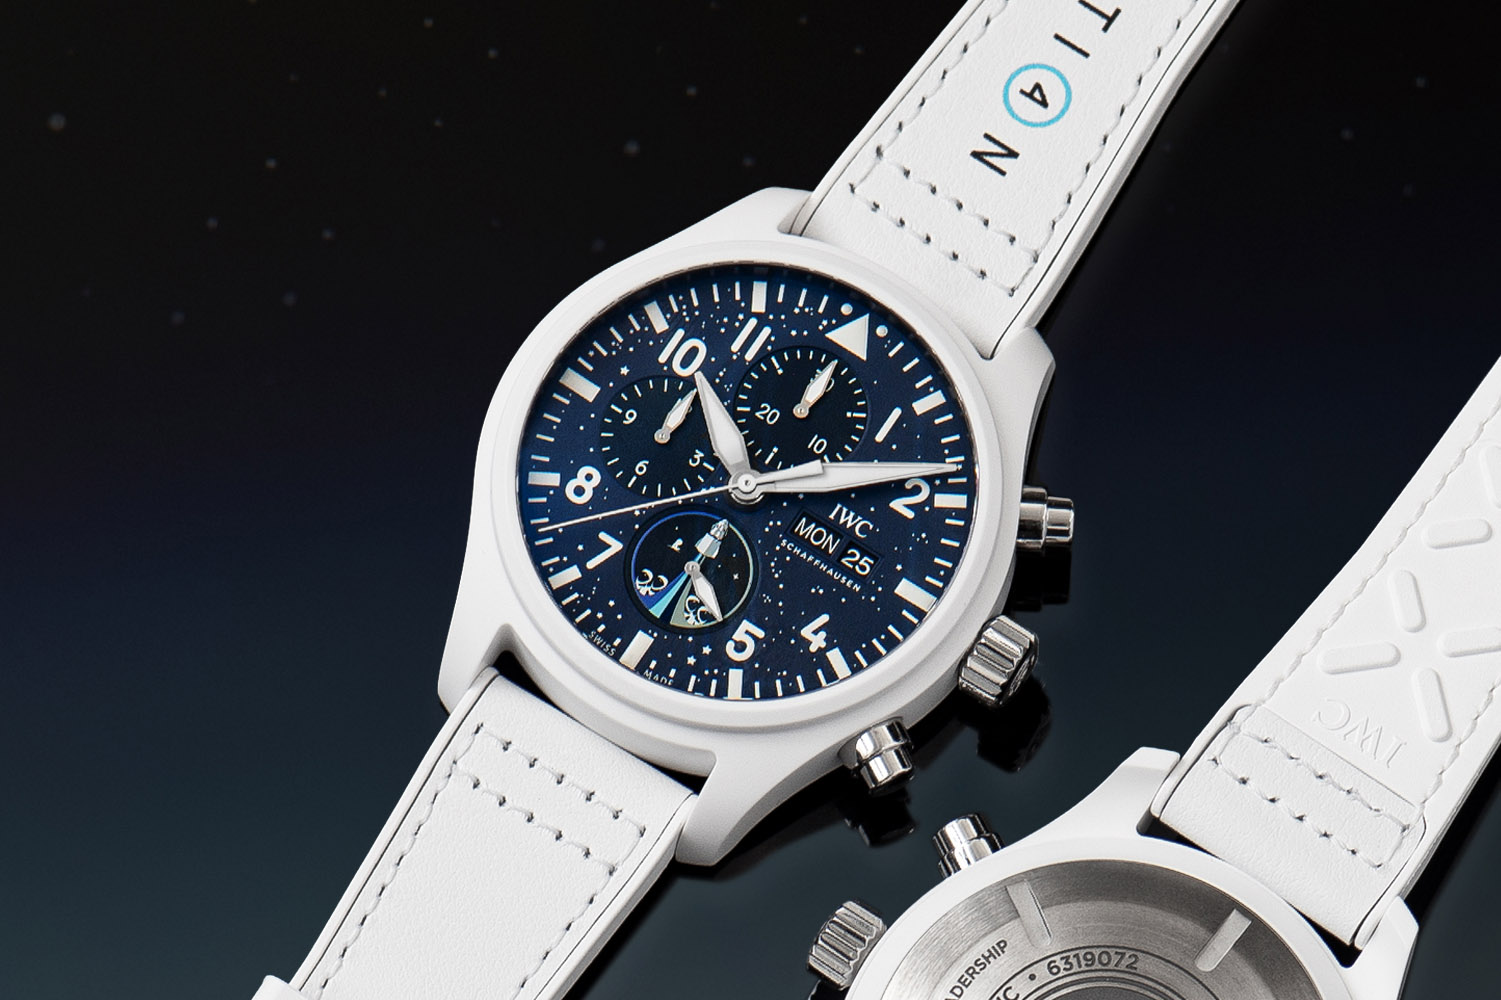 IWC Pilot’s Watch Chronograph Edition Inspiration4 Space Watches White Ceramic IW389110